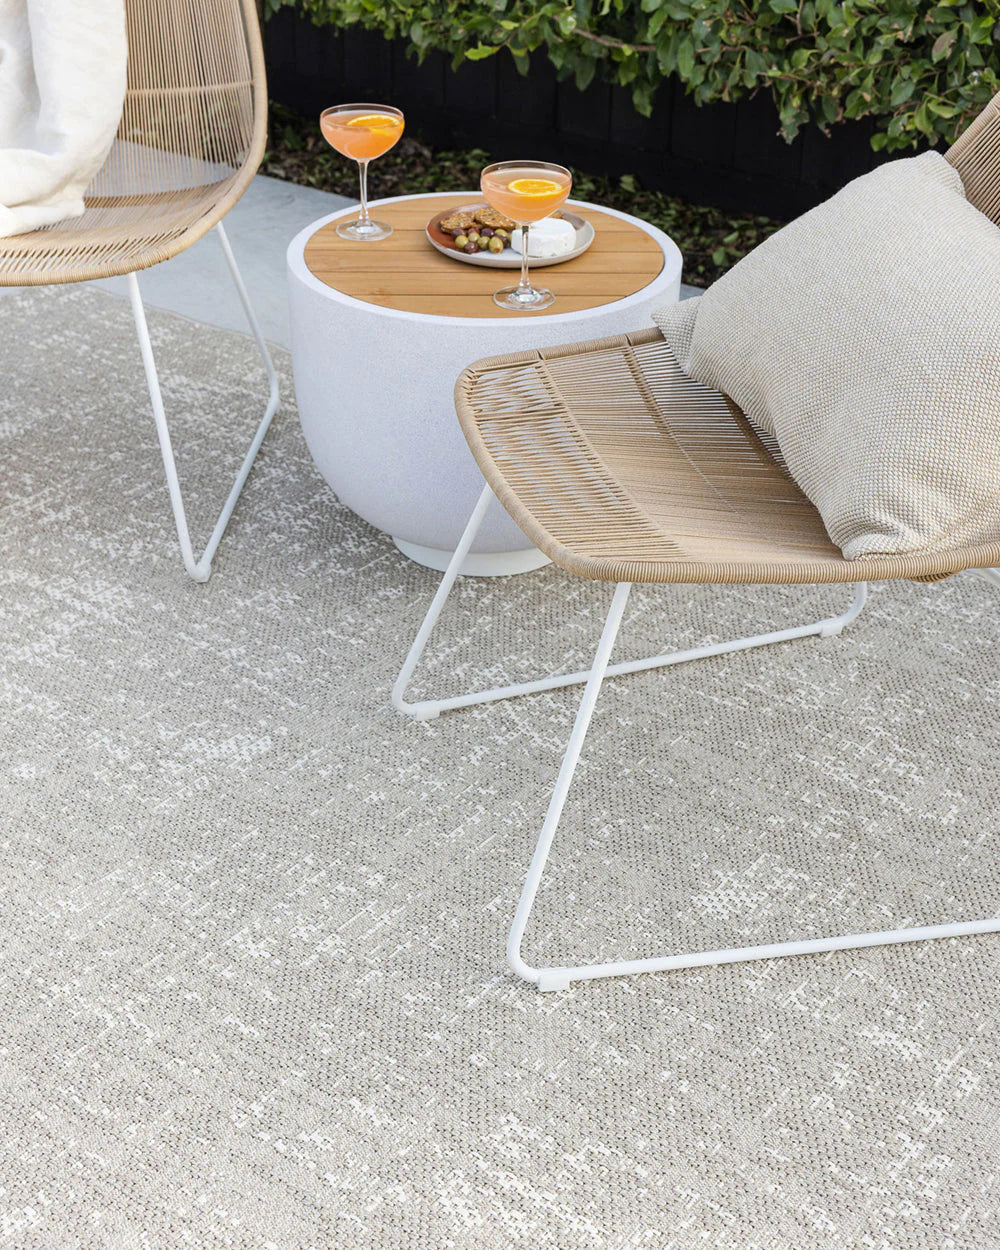 Rattan Outdoor Rug from Baya Furtex Stockist Make Your House A Home, Furniture Store Bendigo. Free Australia Wide Delivery.